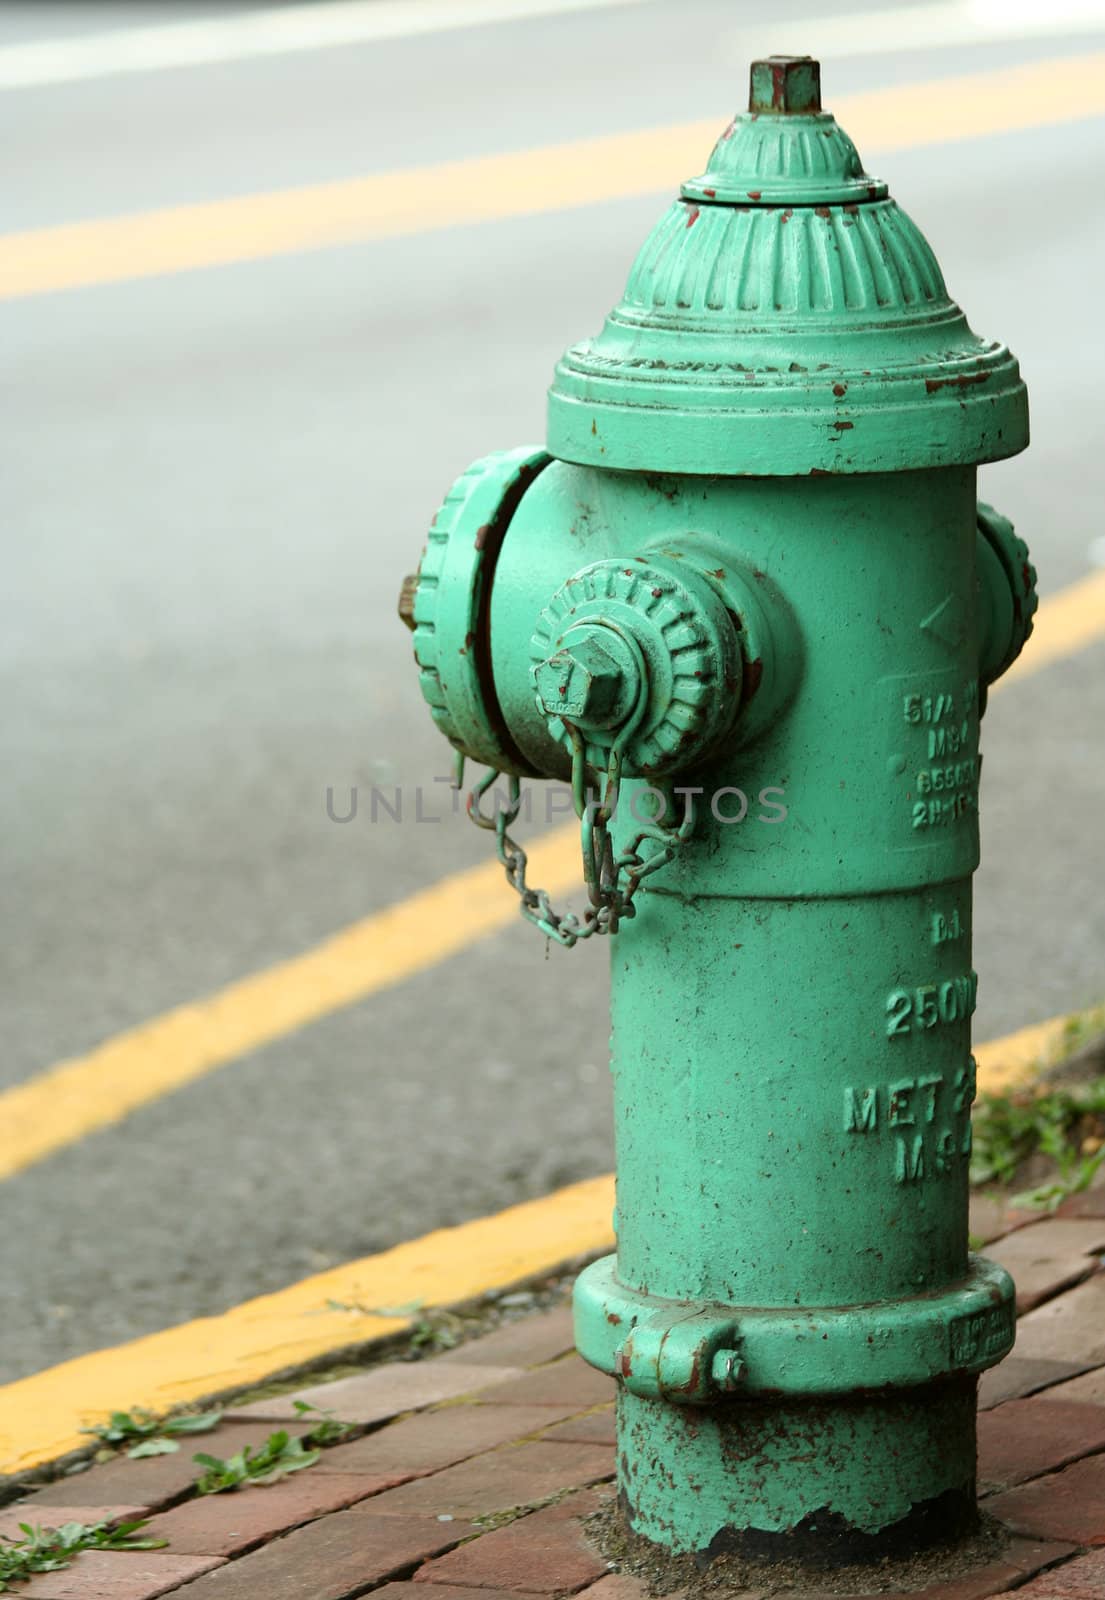 A old green Fire hydrant on the street